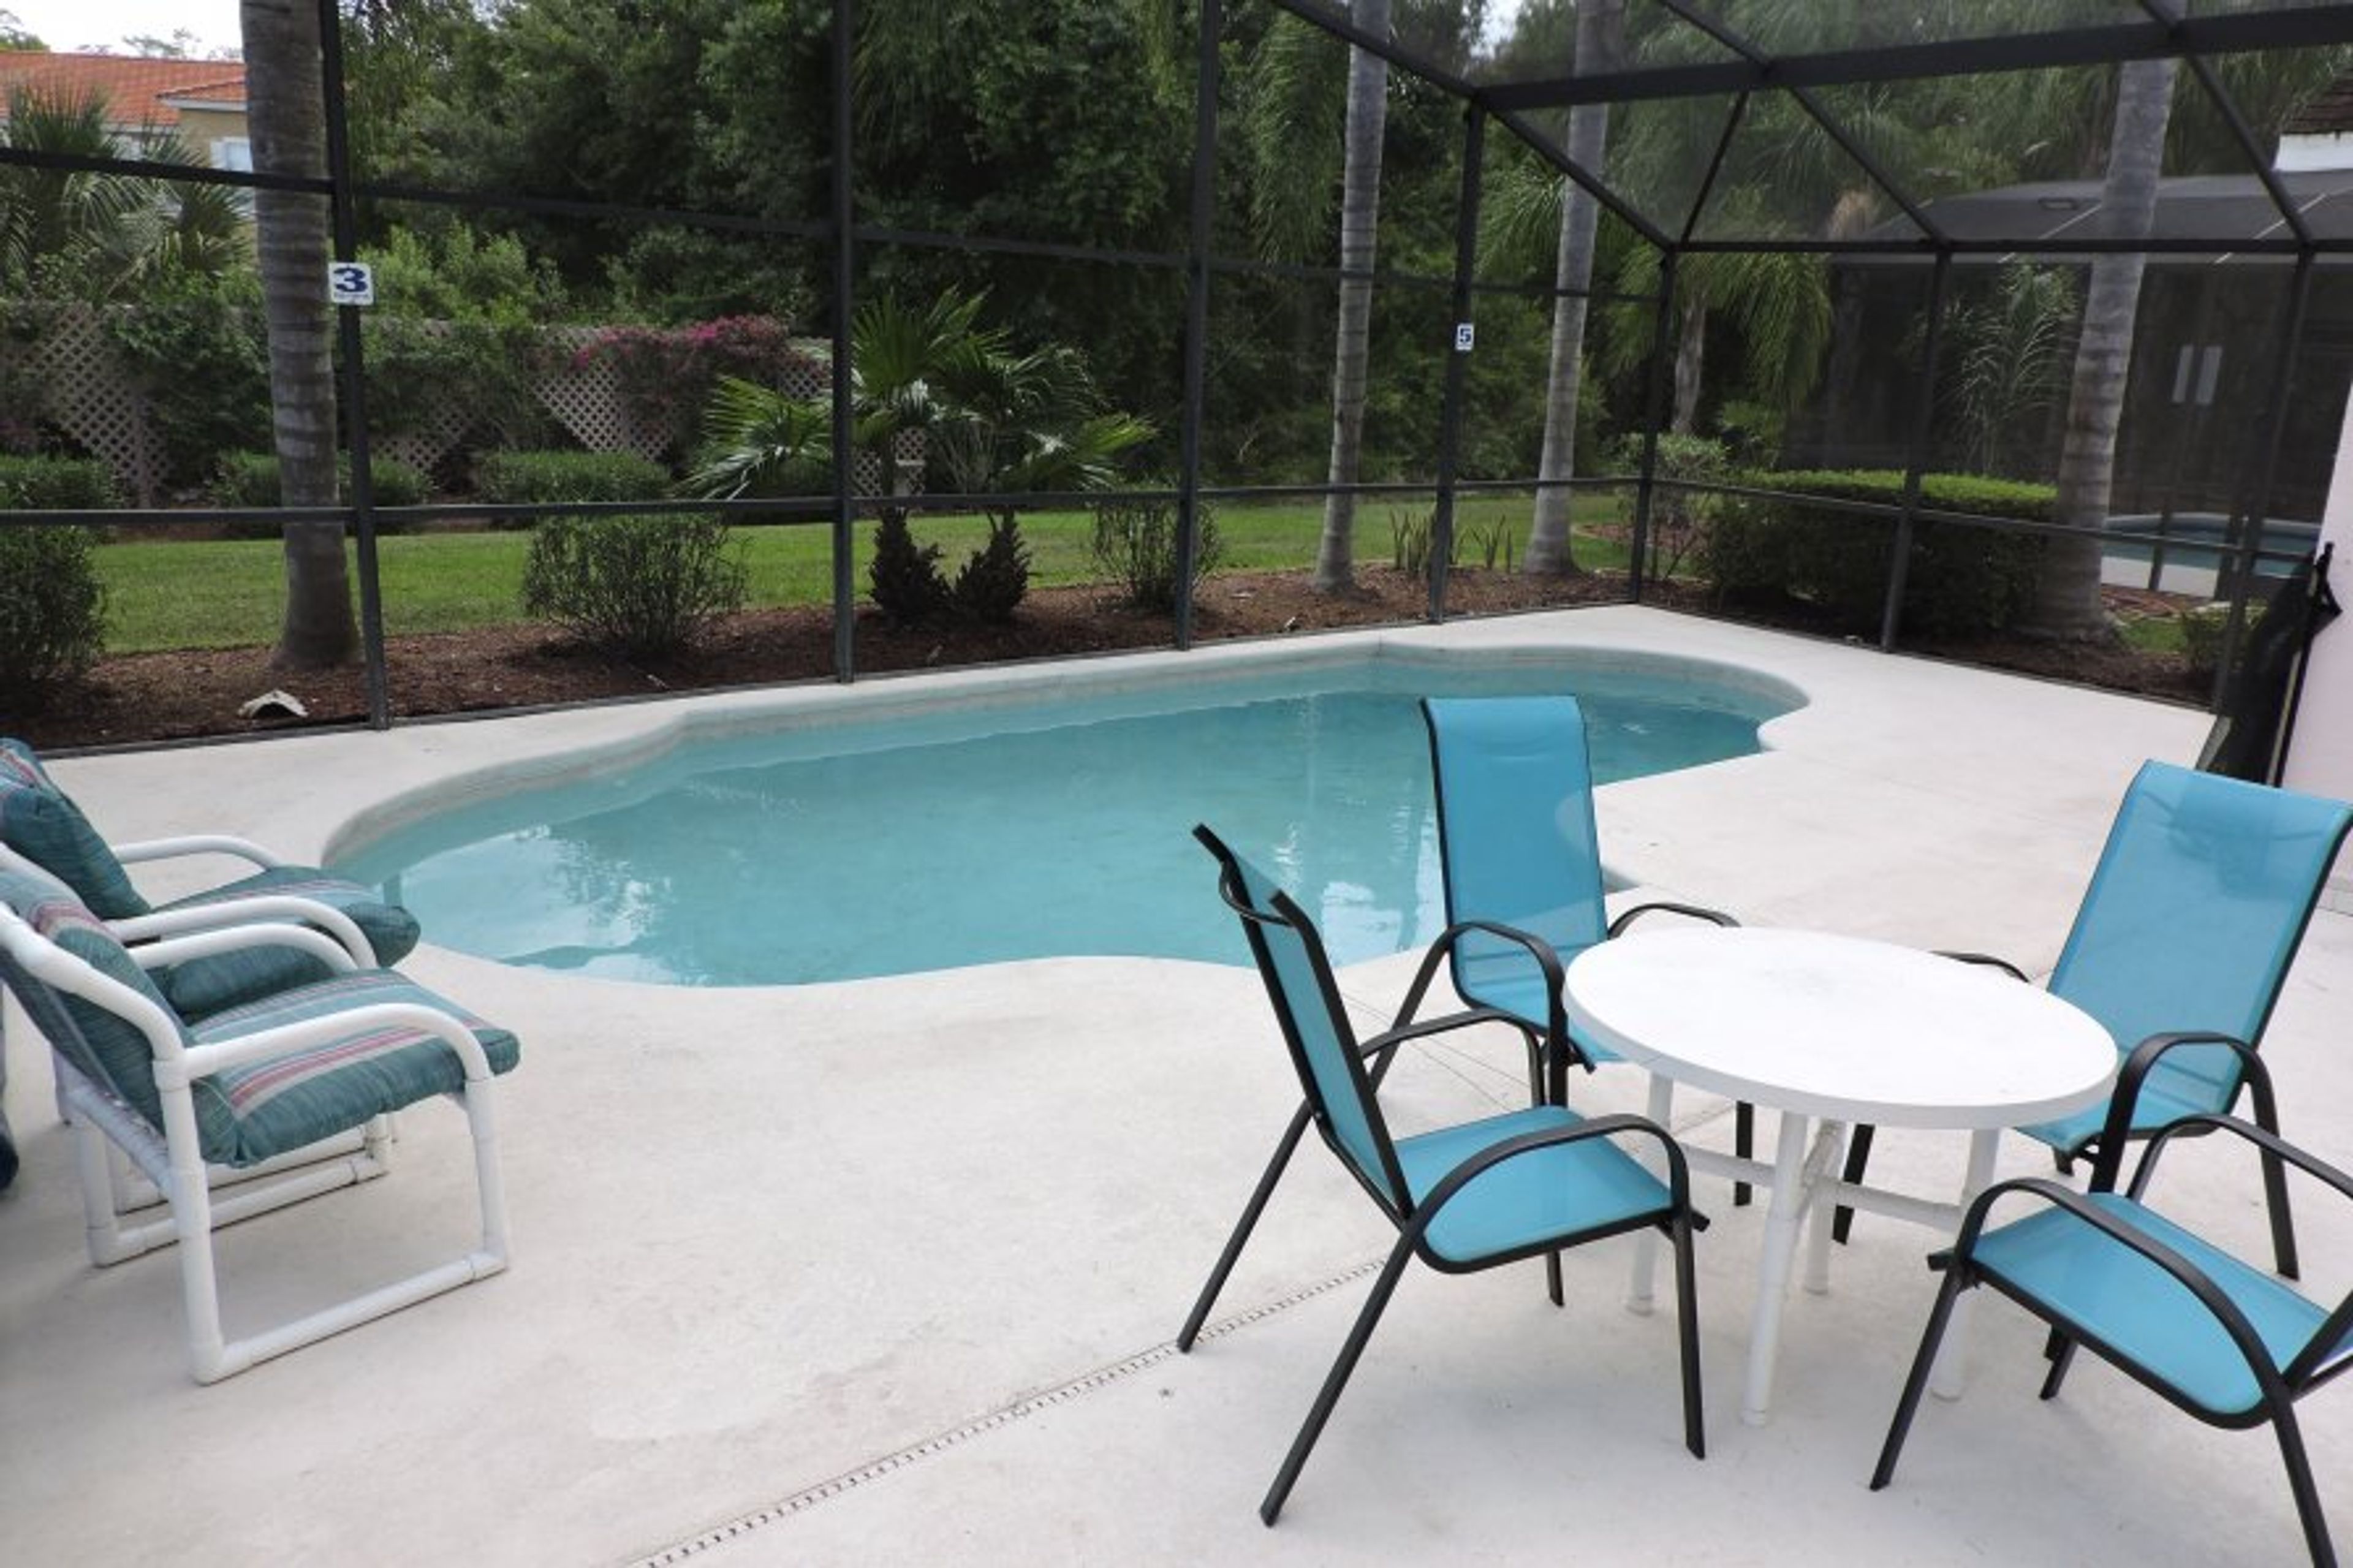 Your private pool, can be heated